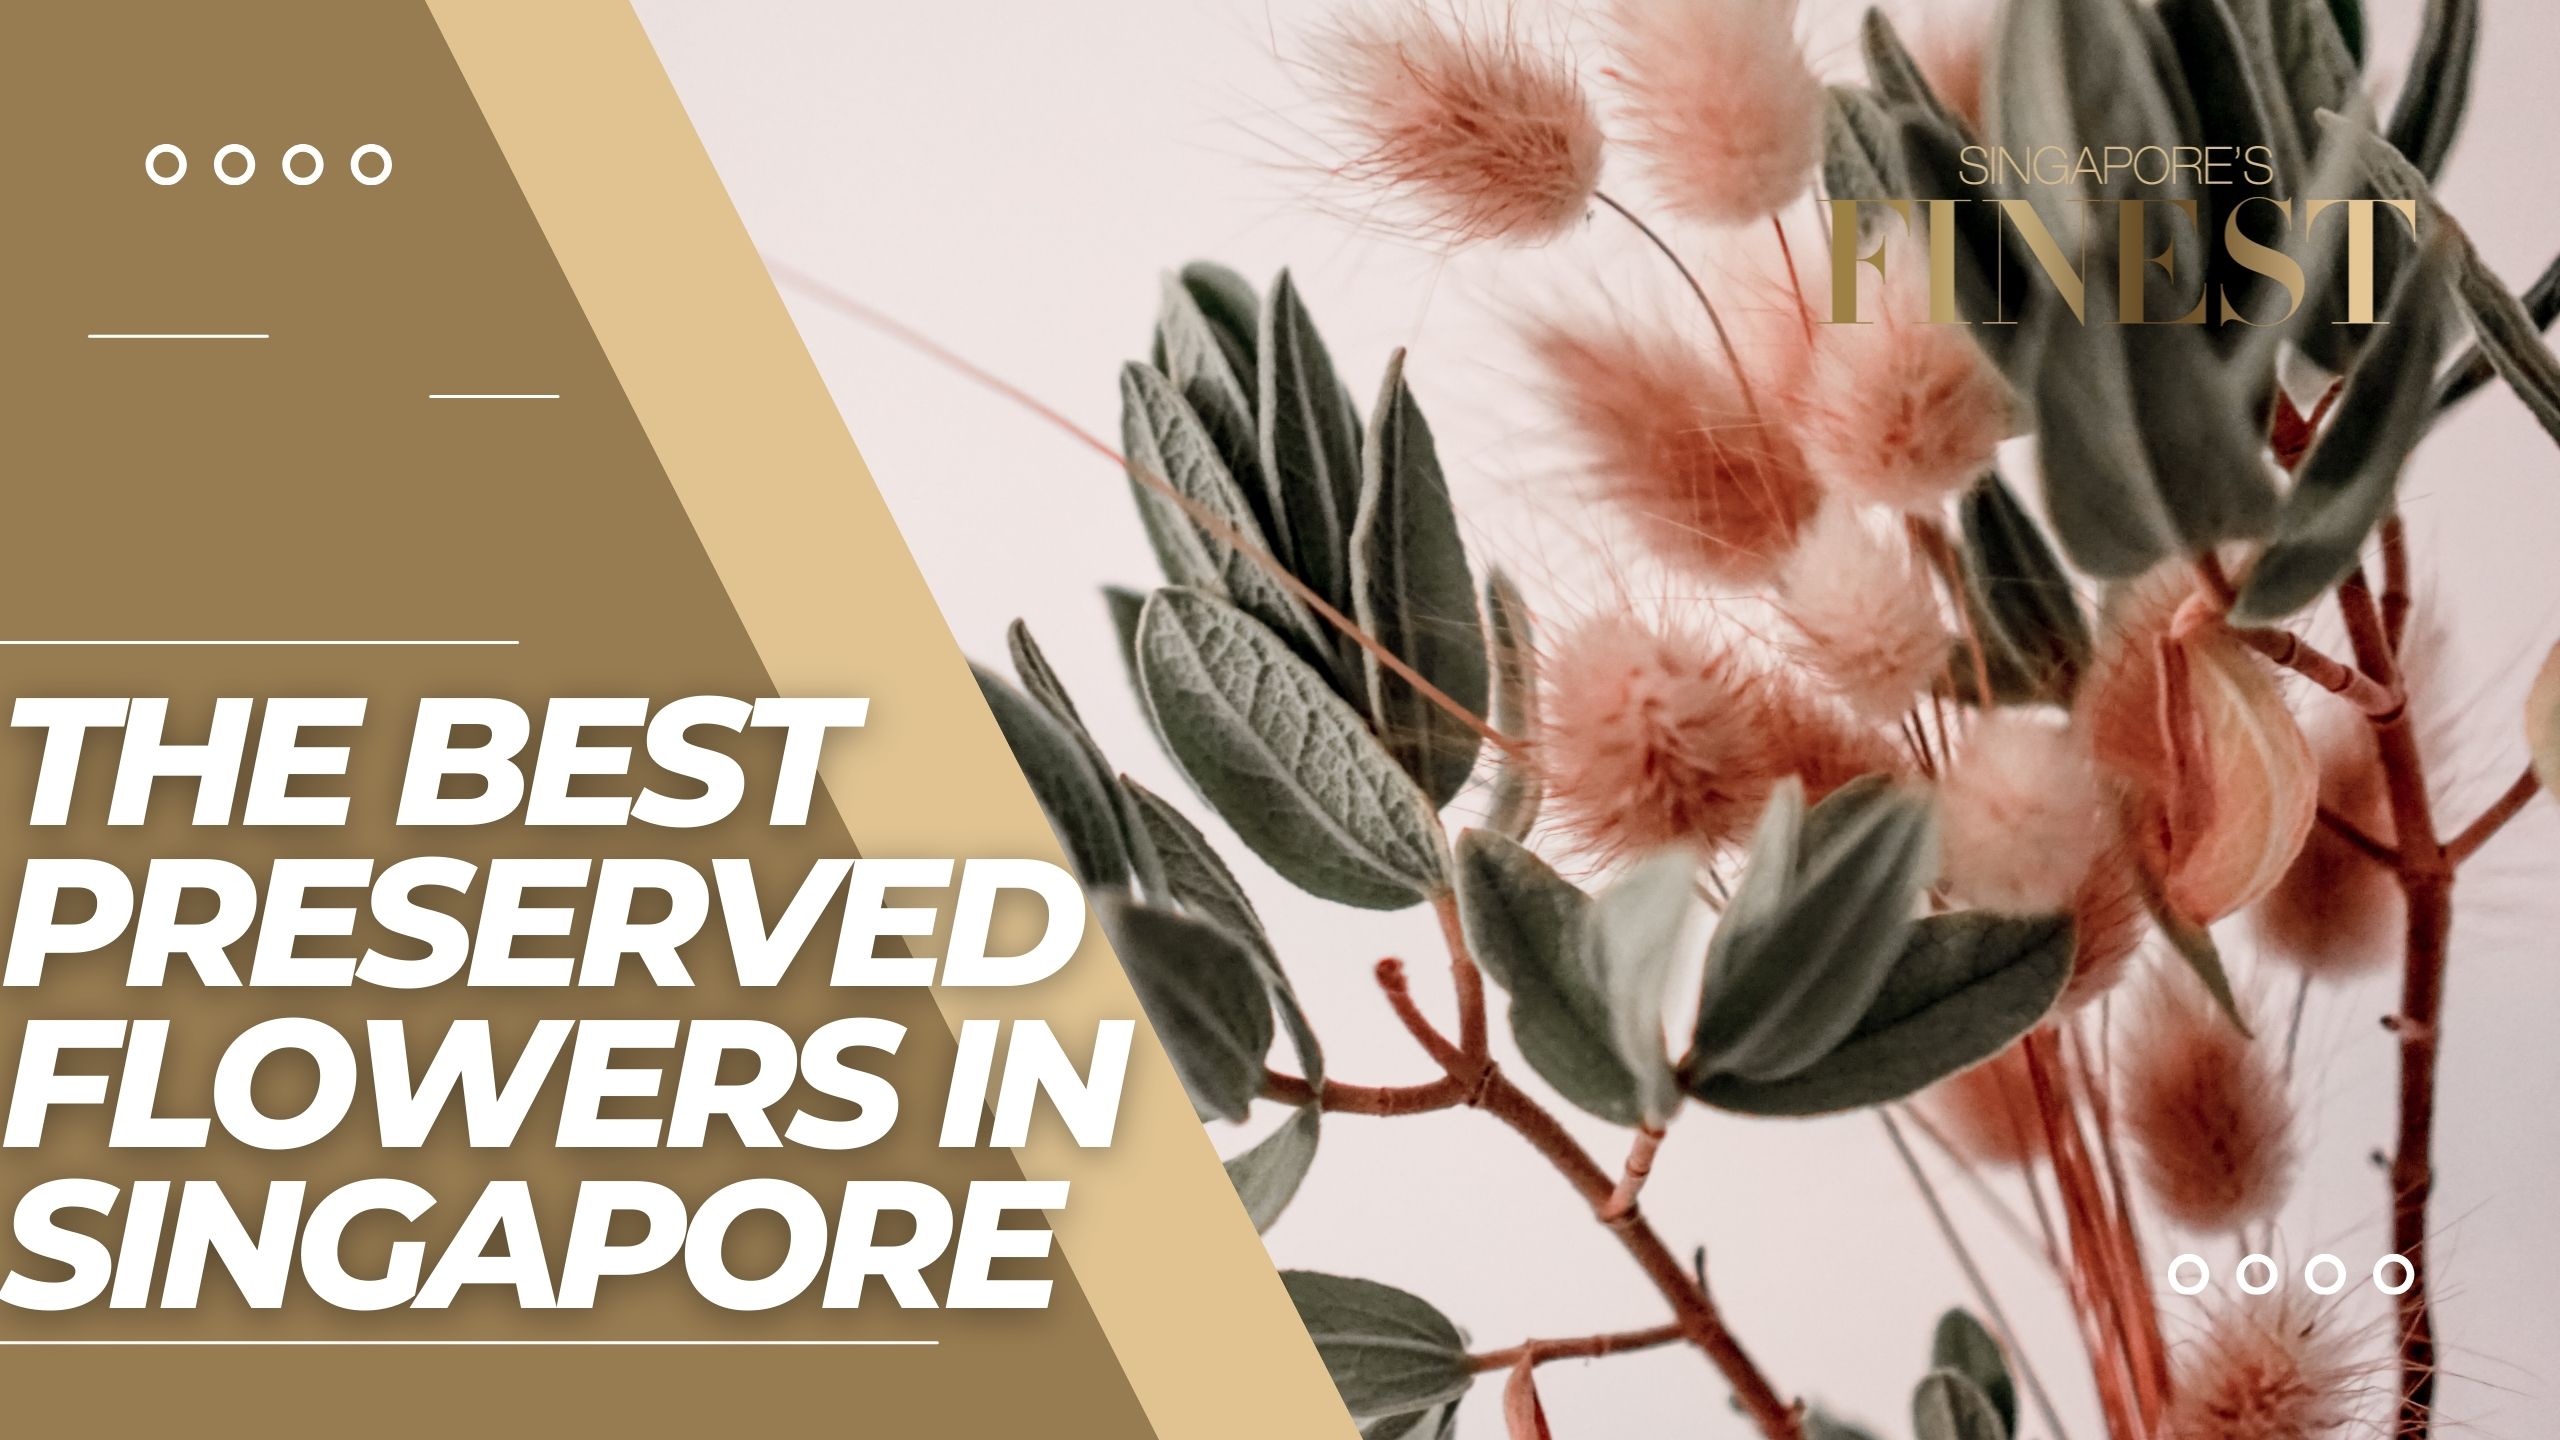 The Finest Florist for the Best Preserved Flowers in Singapore